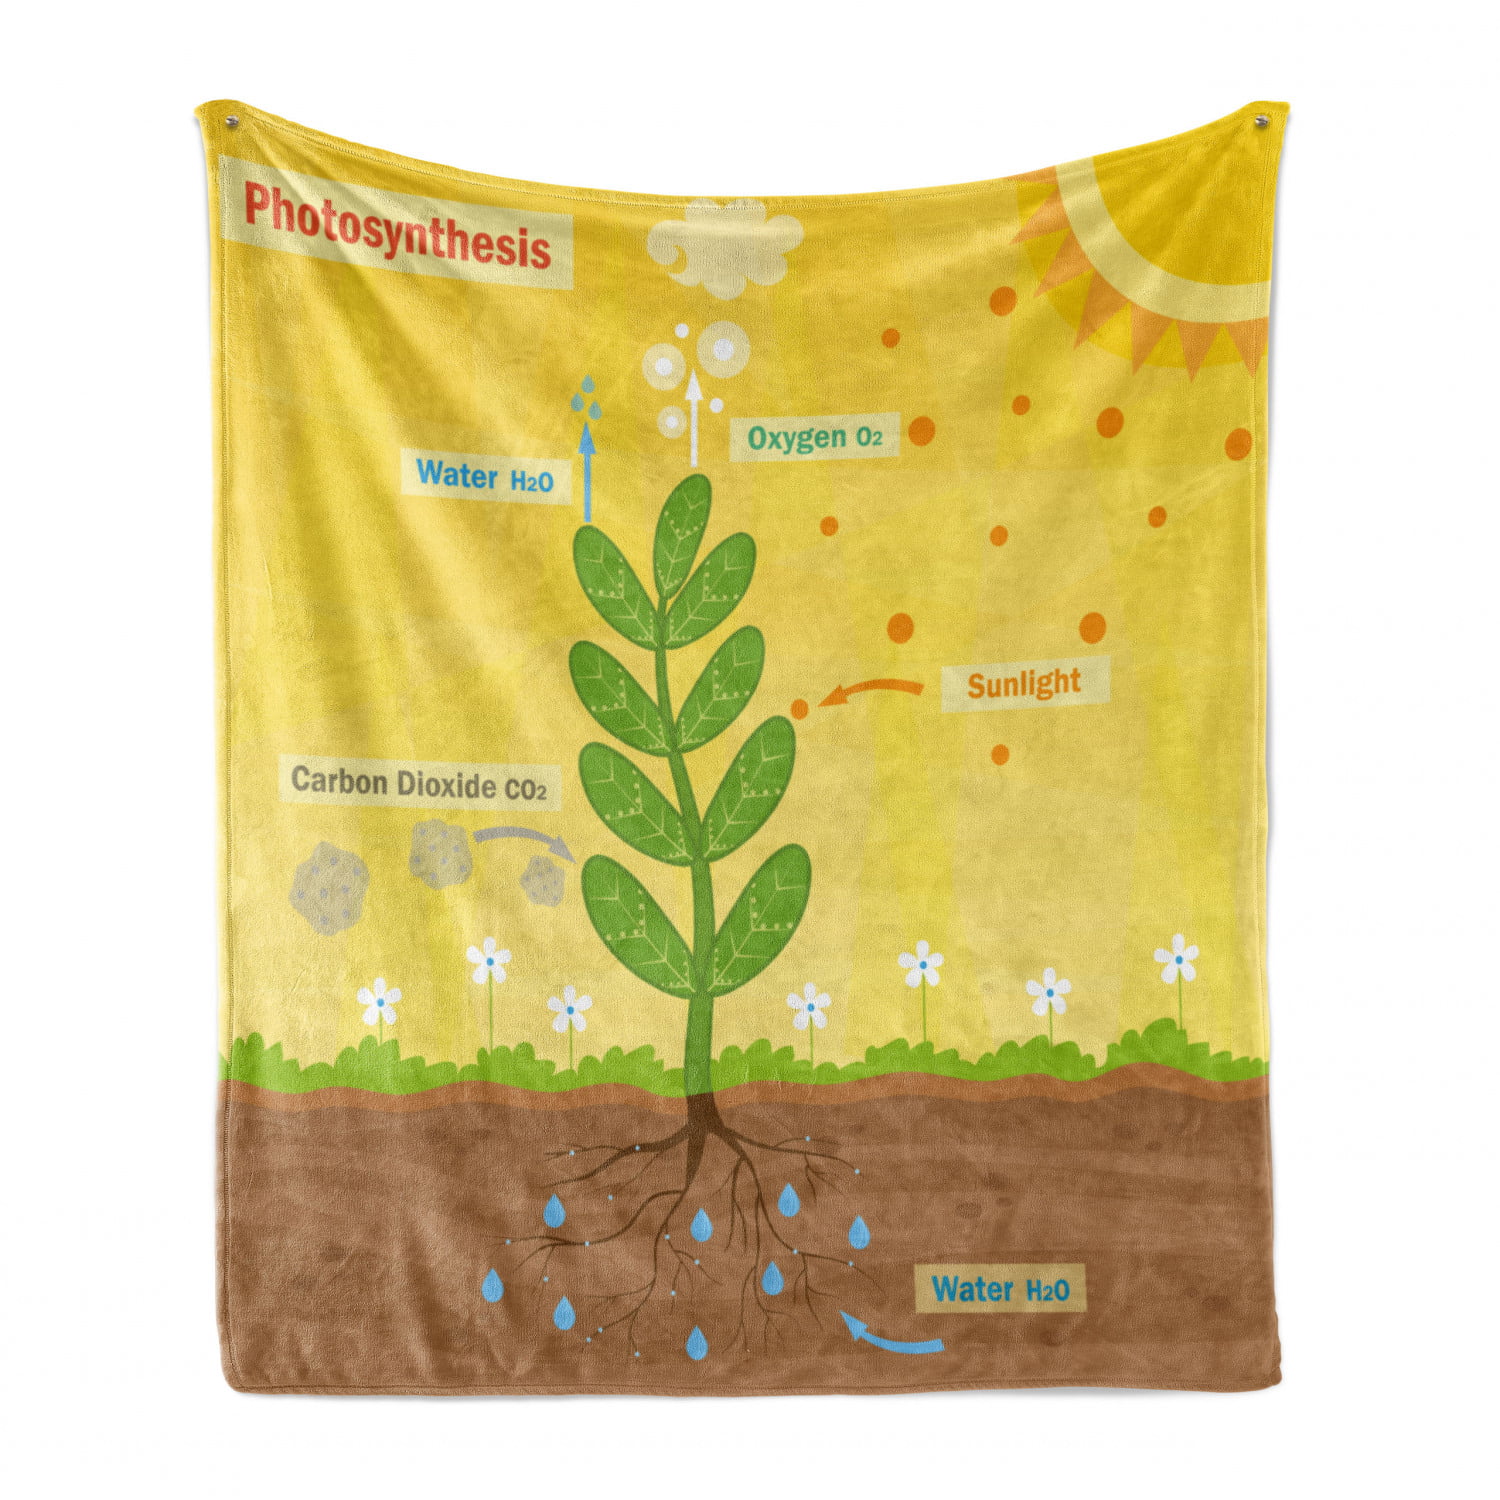 Earth Yellow Green Umber Ambesonne Science Soft Flannel Fleece Throw Blanket 50 x 60 Cartoon Photosynthesis Oxygen Carbon Dioxide Sunlight and Water Cozy Plush for Indoor and Outdoor Use 